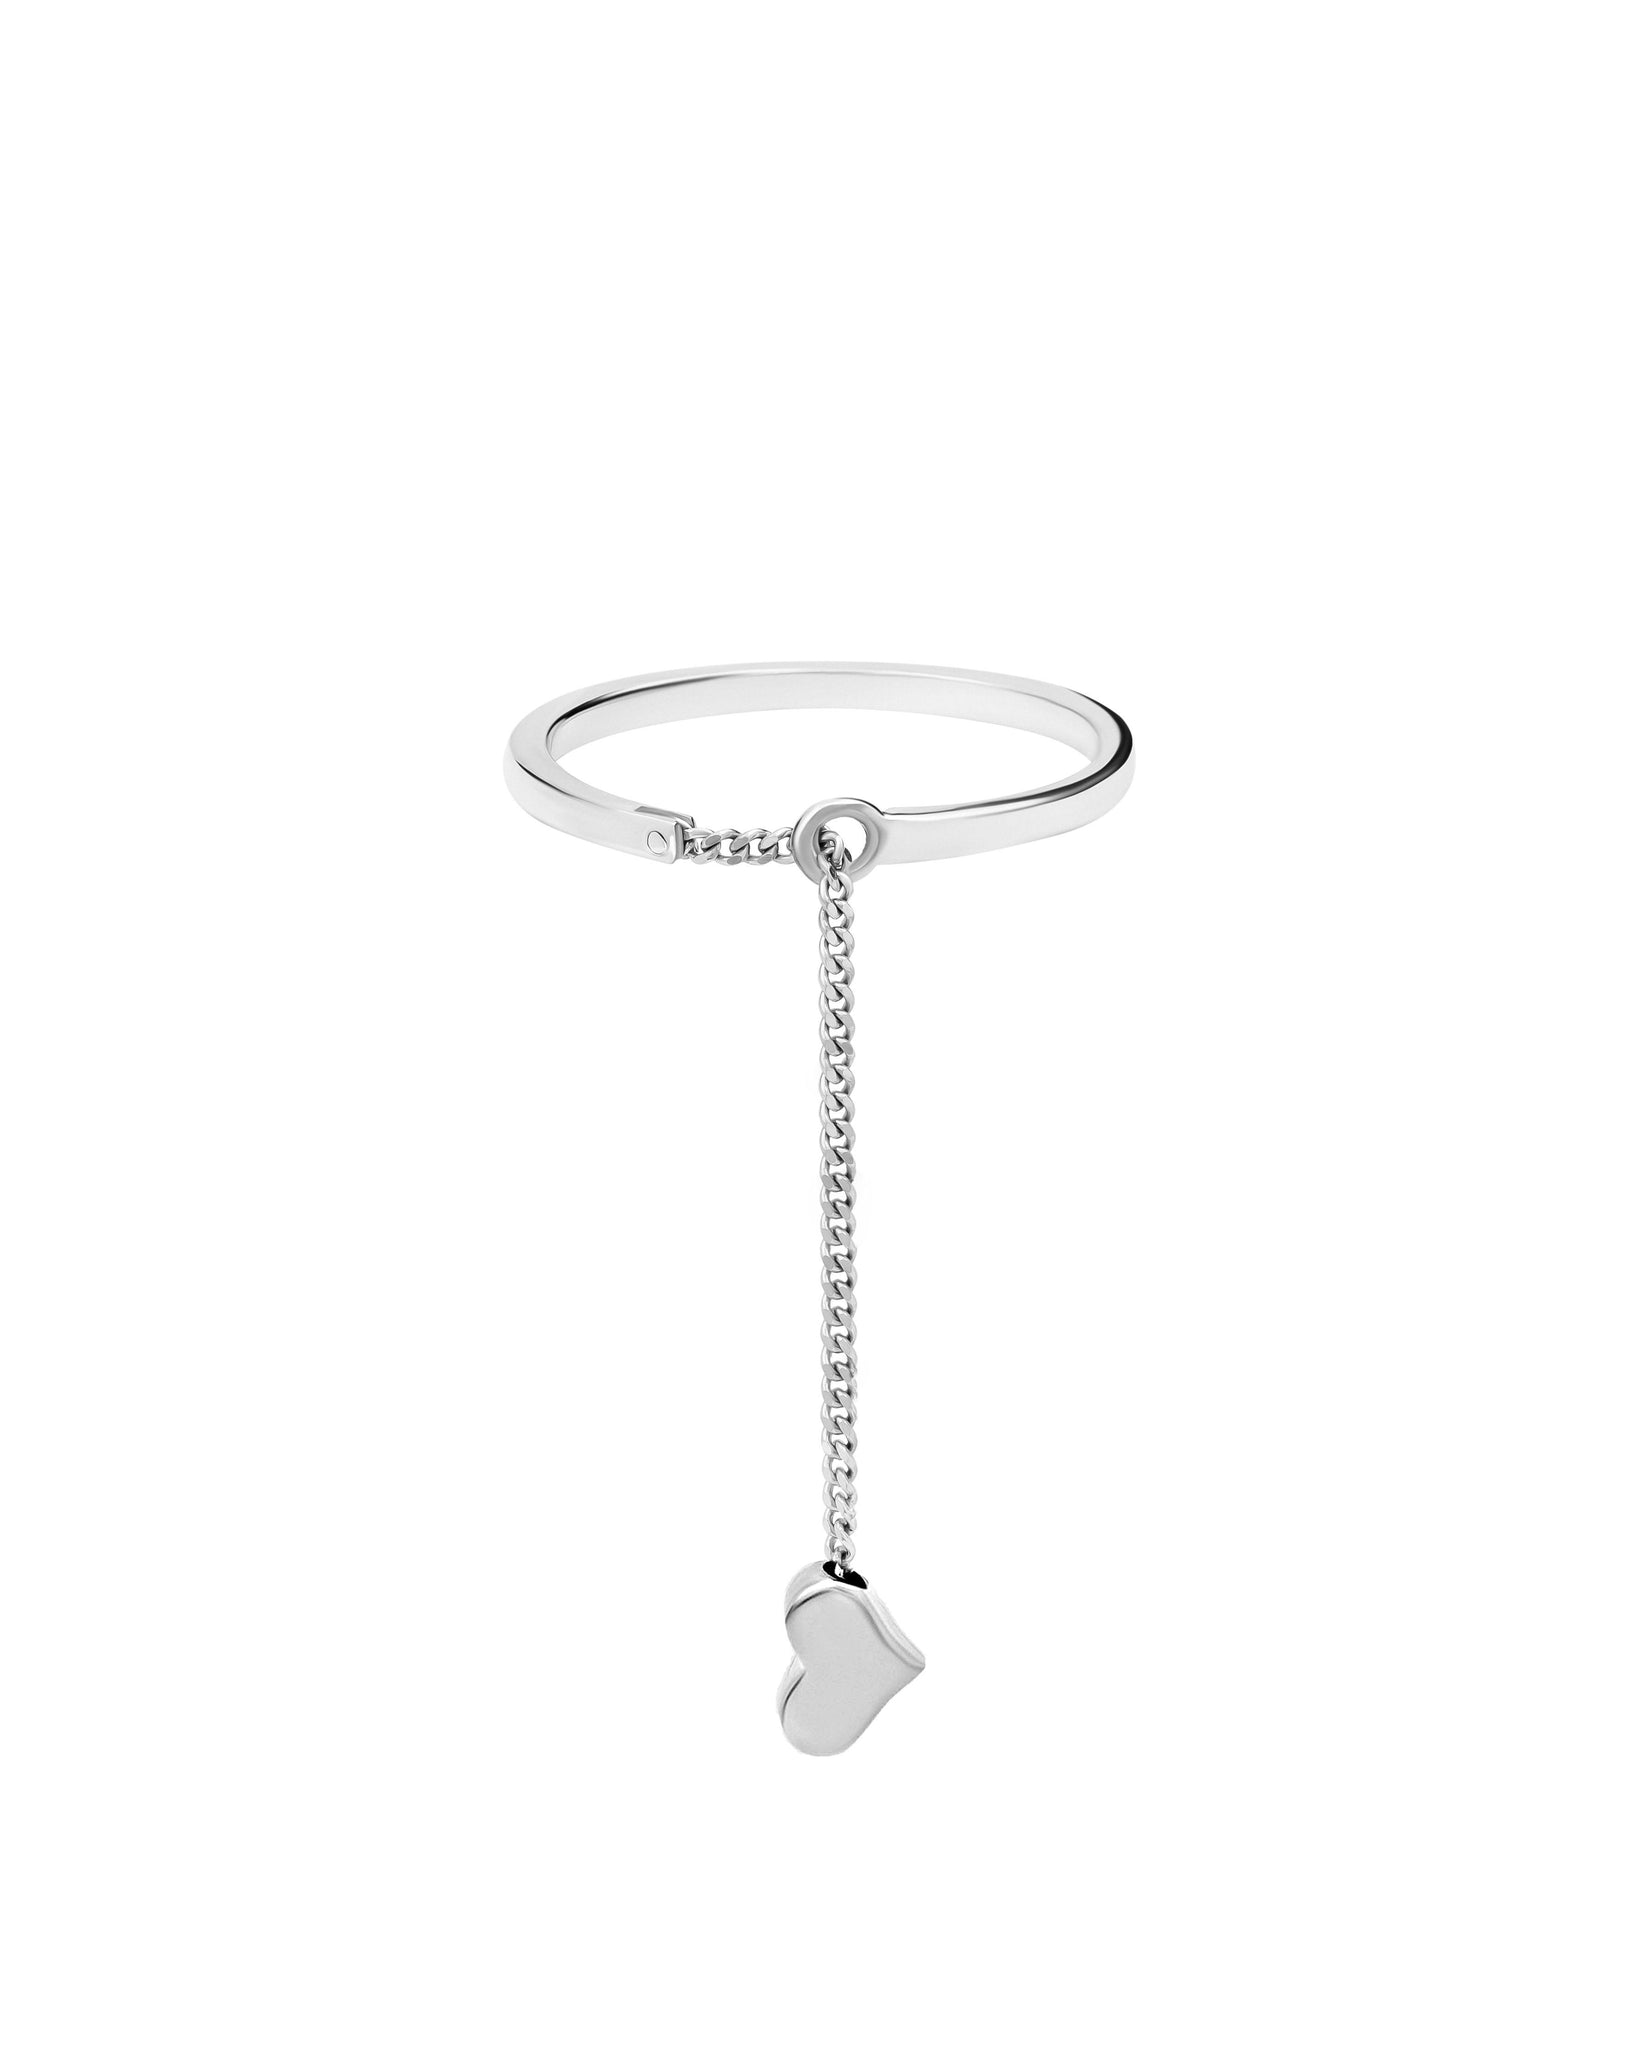 Silver Chain Heart Ring | Unique Delicate Jewelry | Independent Fashion Jewellery